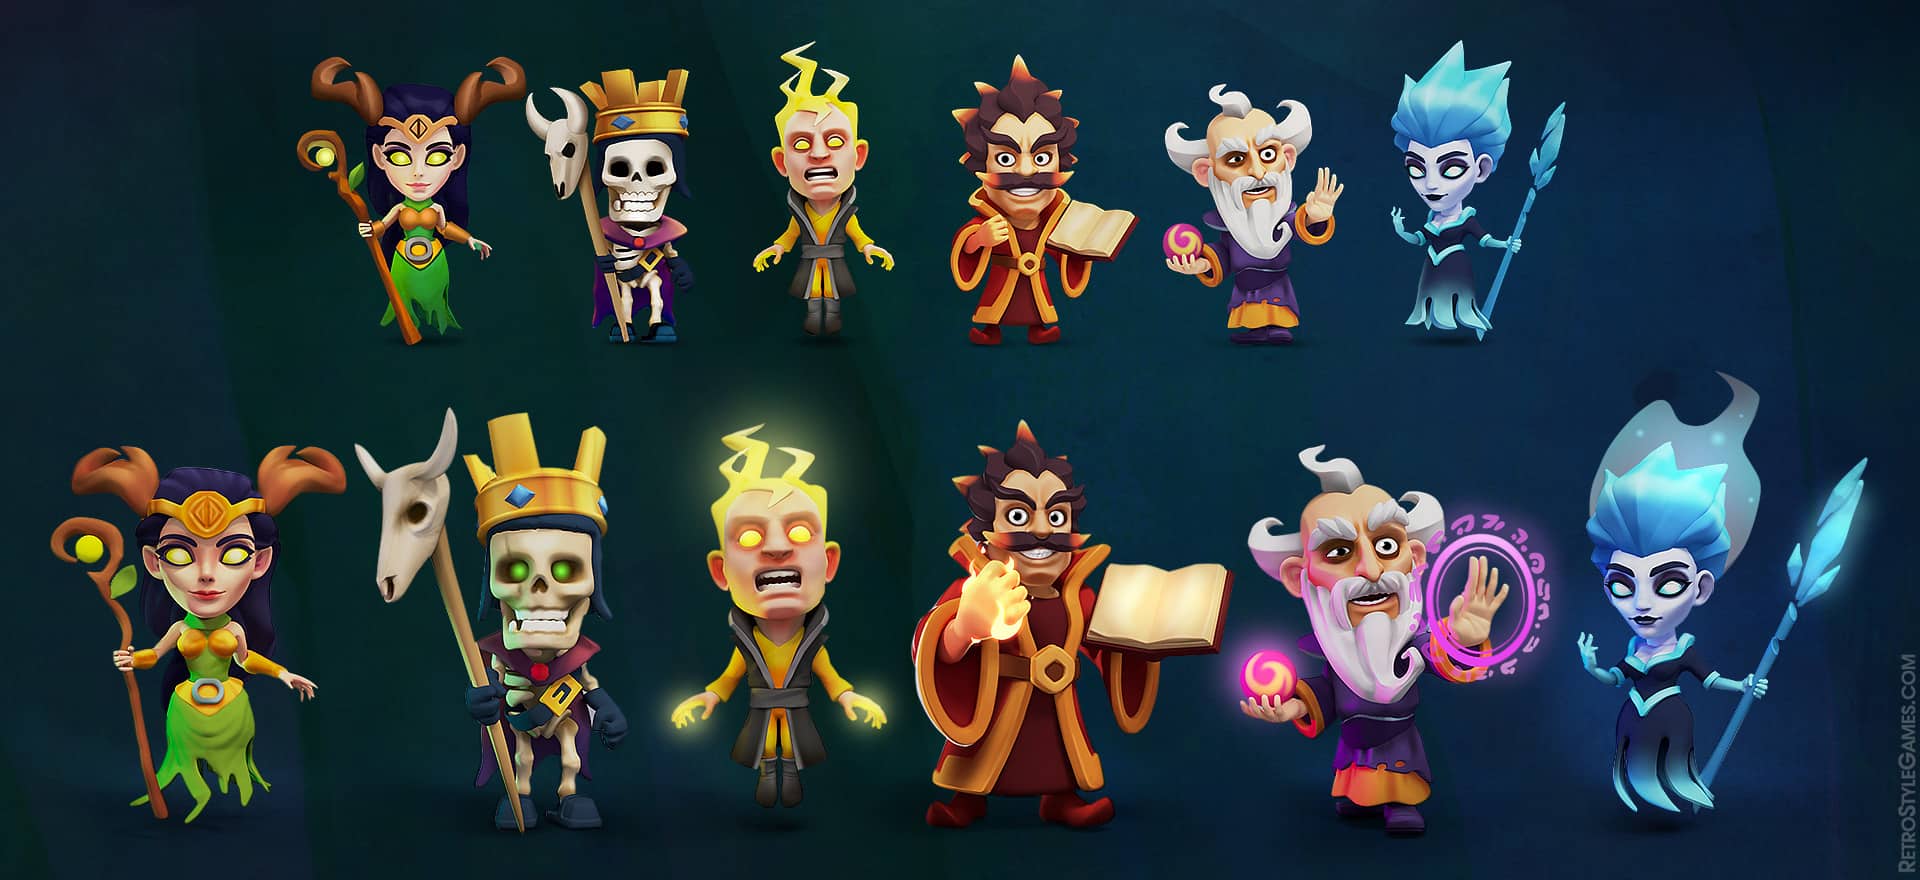 3d mobile characters sheet in the style of Clash Royale.jpg